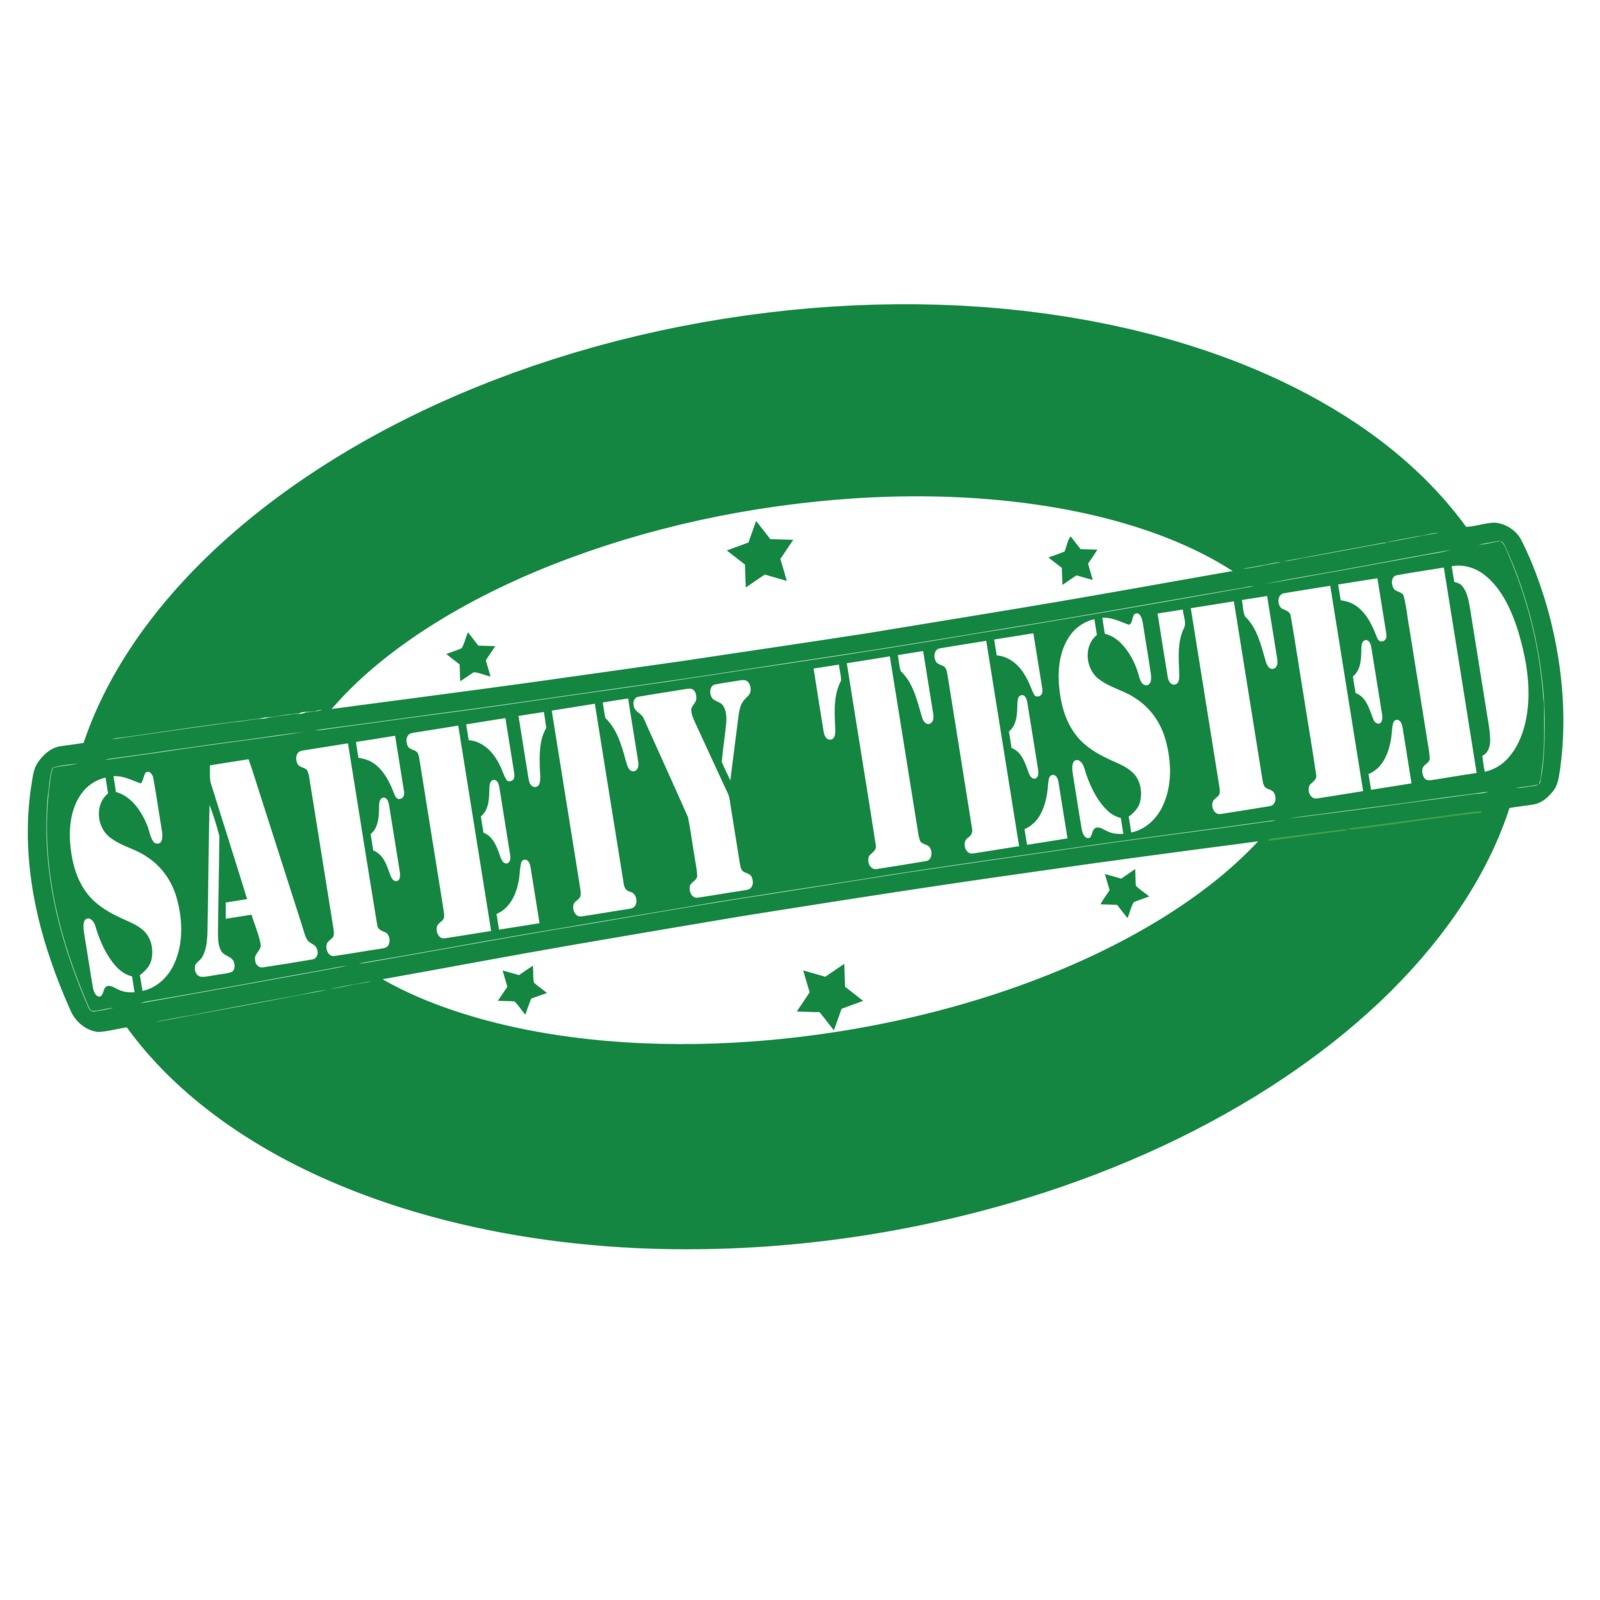 Safety tested by carmenbobo